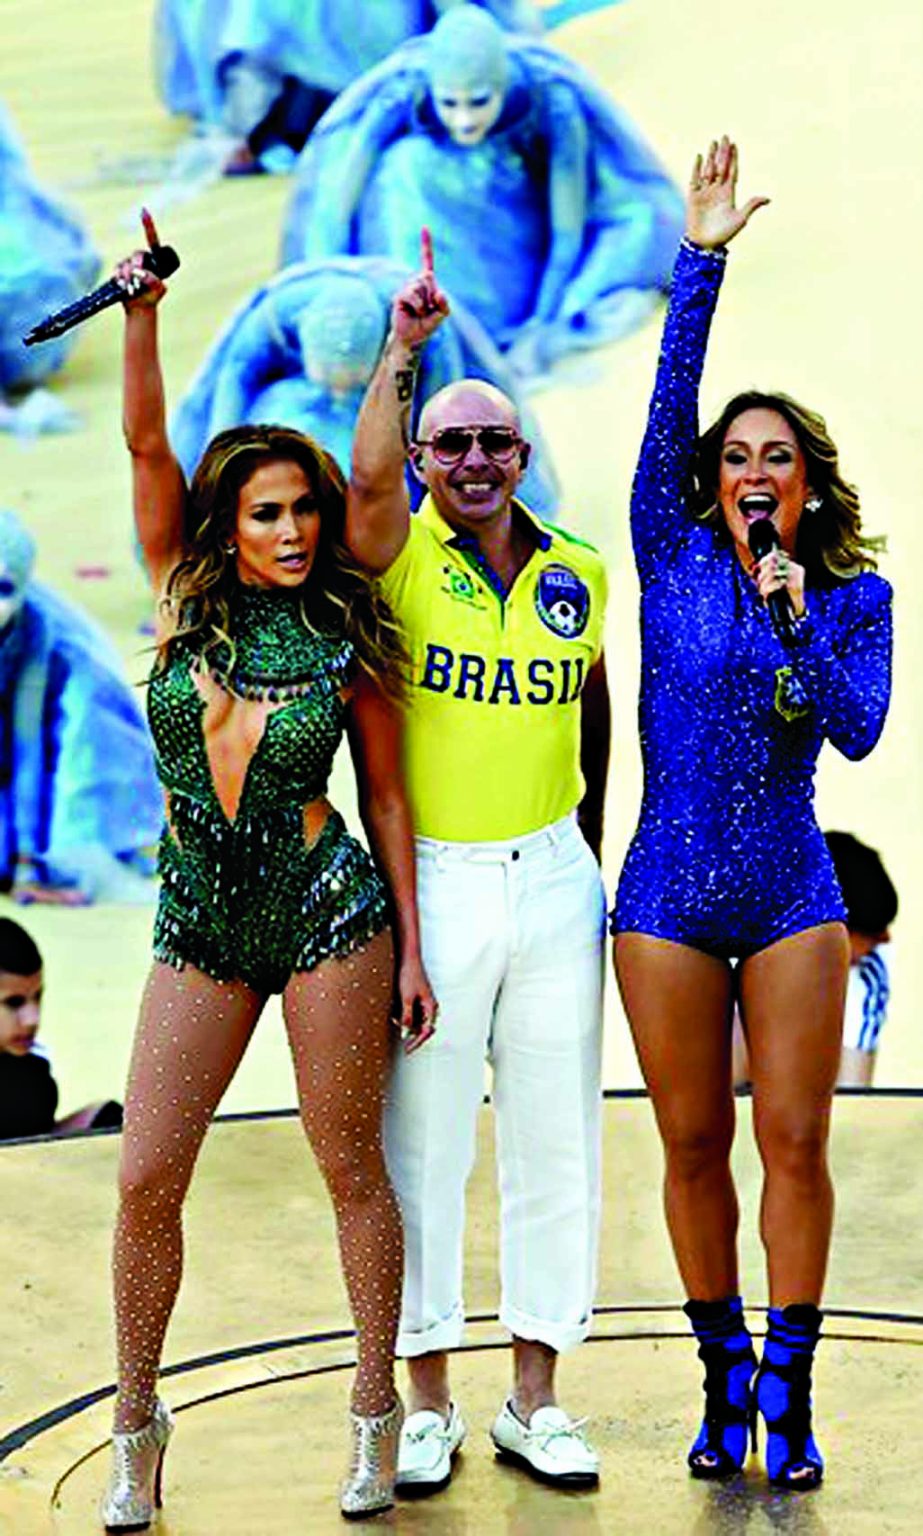 Performers are led by US singer Jennifer Lopez (L) US rapper Pitbull (C) and Brazilian pop singer Claudia Leitte (R) as they take part in the opening ceremony of the 2014 FIFA World Cup at the Corinthians Arena in Sao Paulo on Thursday night prior to the